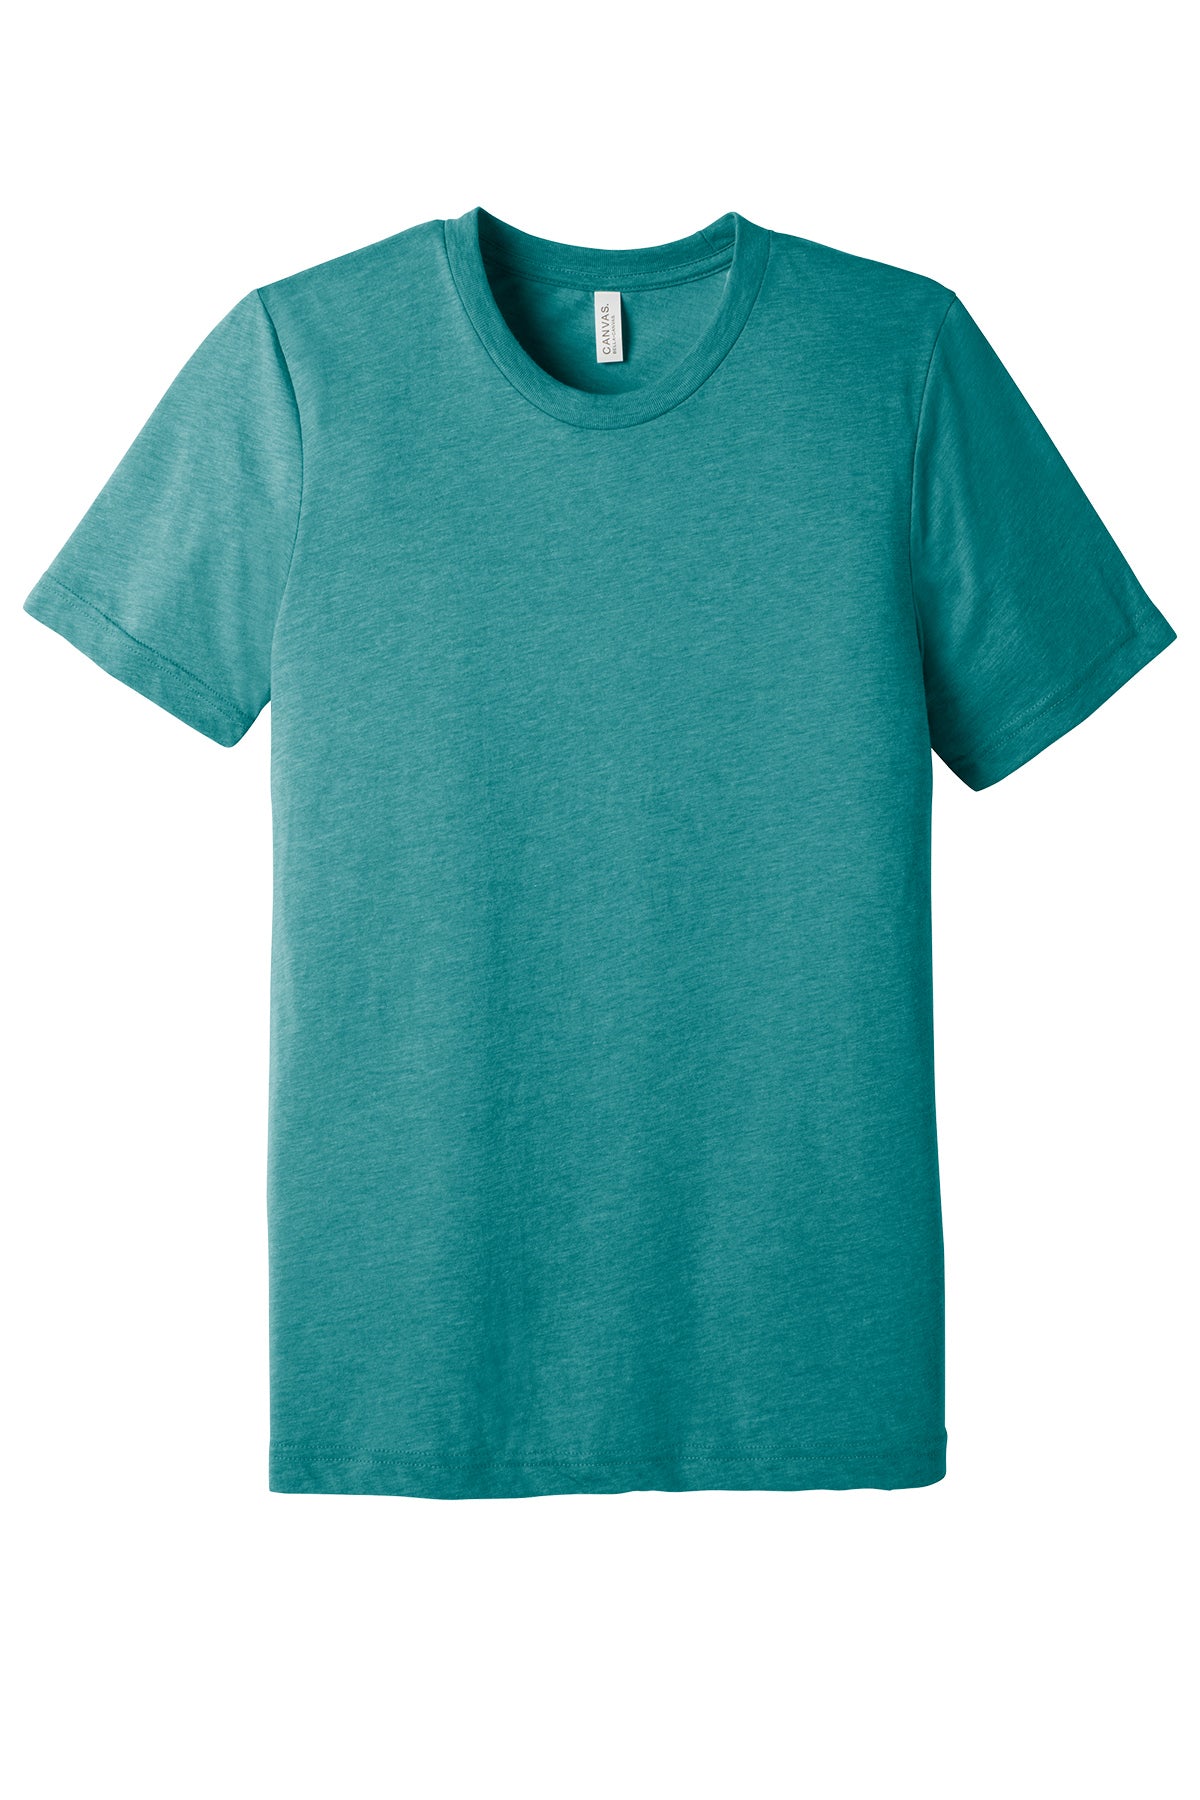 Bella+Canvas Bc3413 Adult T-Shirt Ad Small / Teal Triblend